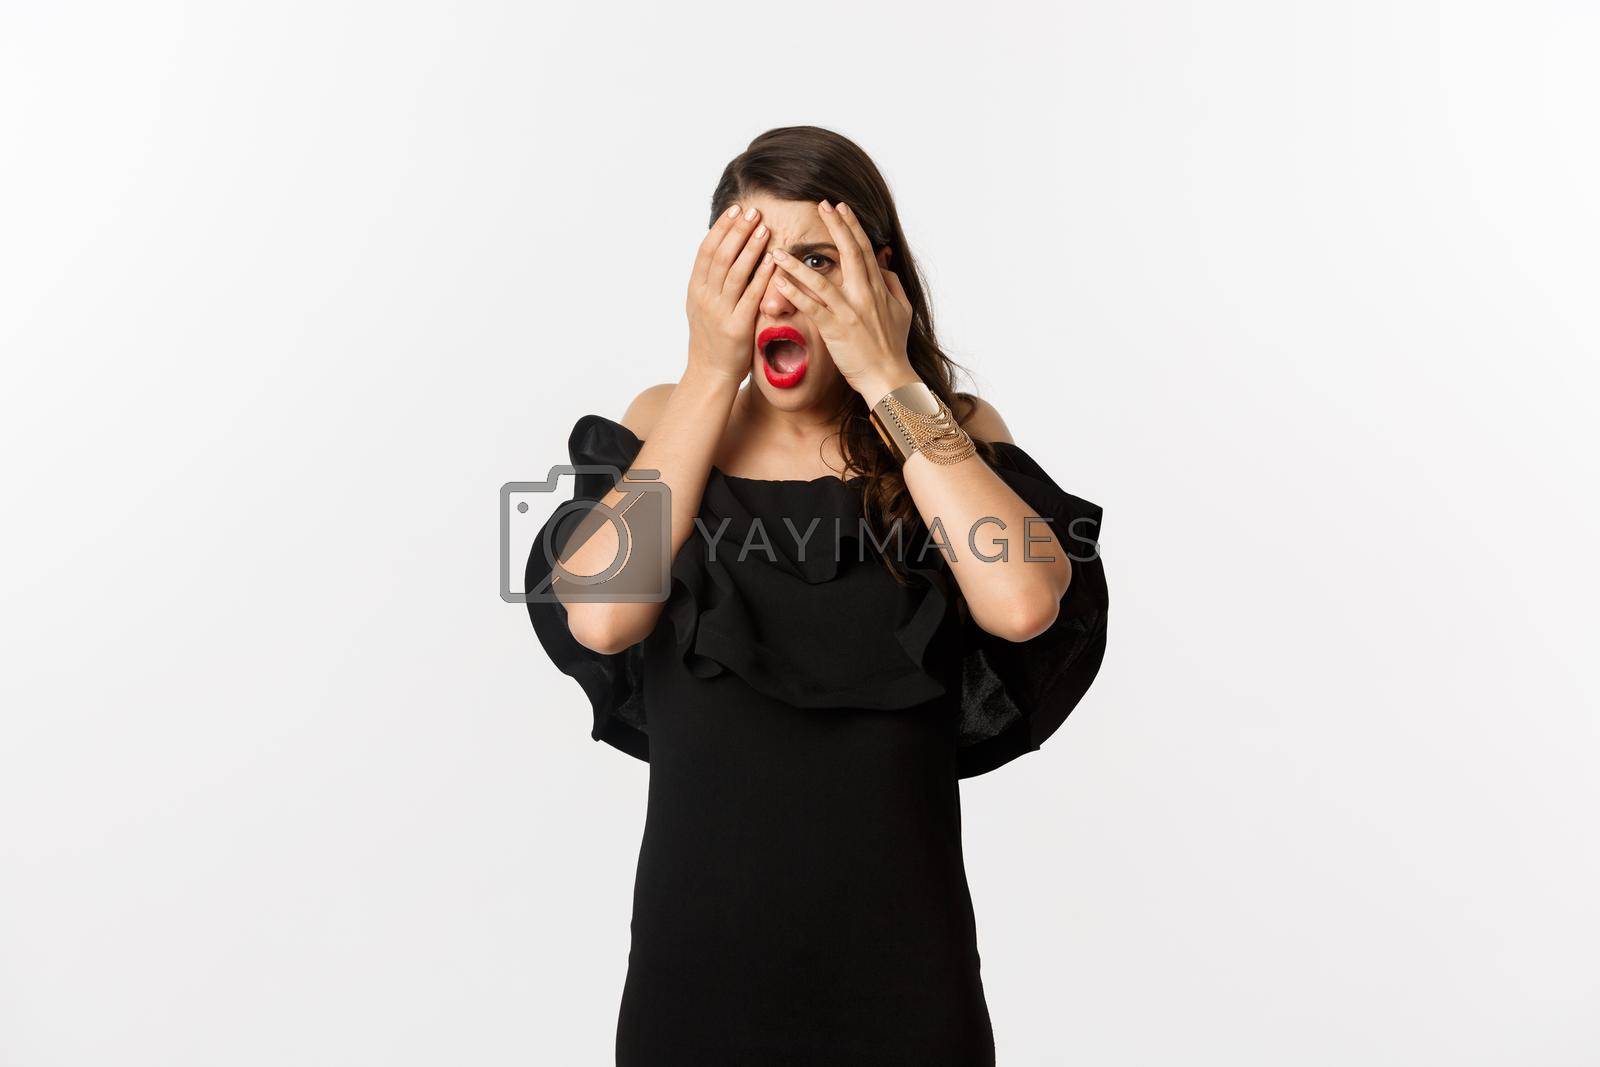 Fashion and beauty. Shocked young woman in black dress covering eyes, peeking through fingers at something embarrassing, cringe, standing over white background.